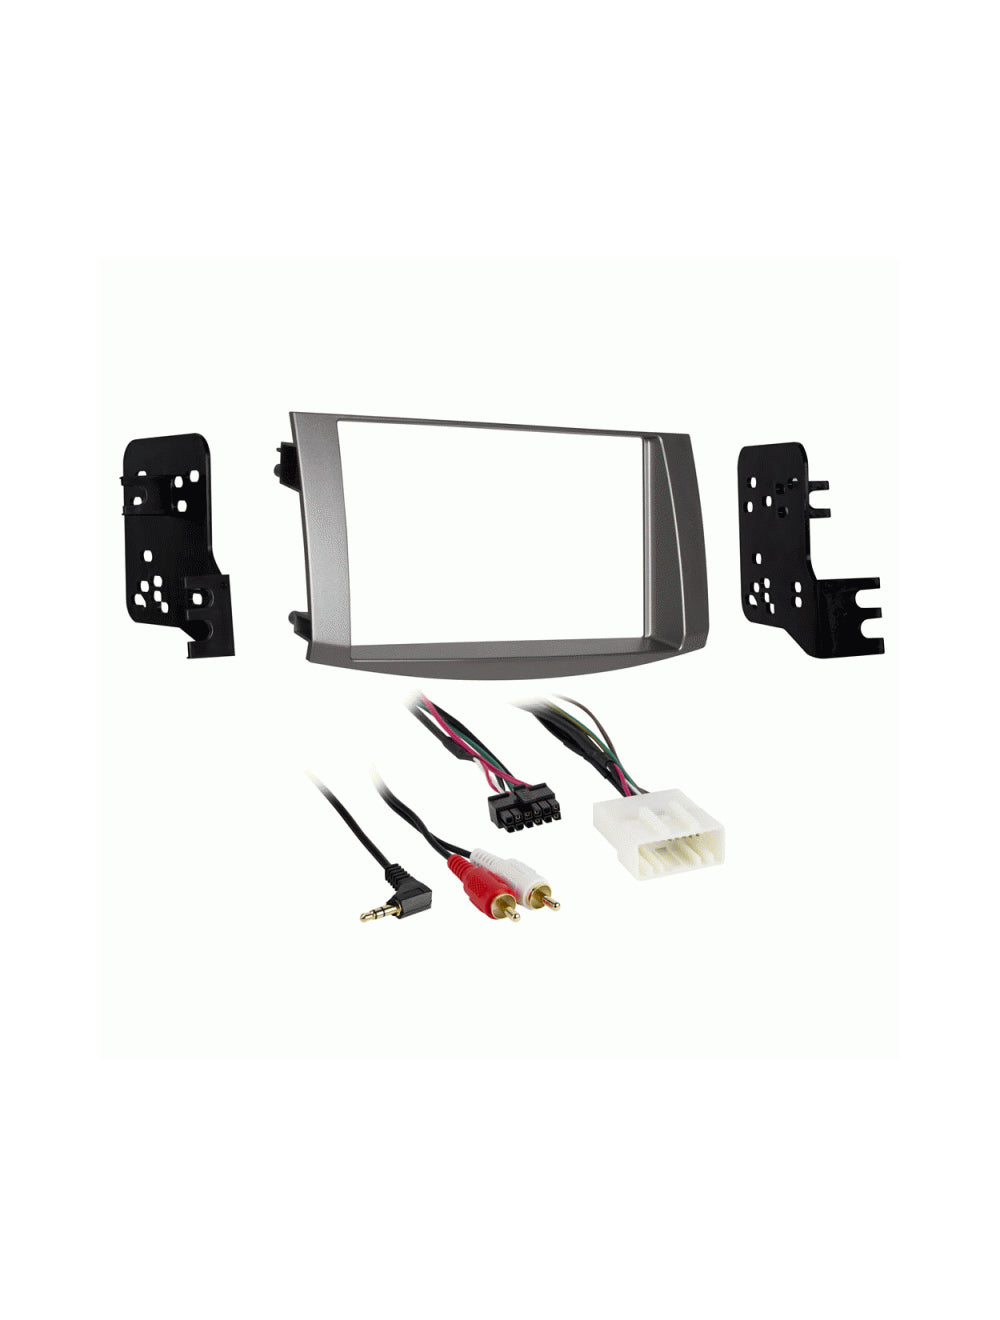 Metra 95-8215S Double DIN Dash Kit for Select 2005-2010 Toyota Avalon Vehicles Silver